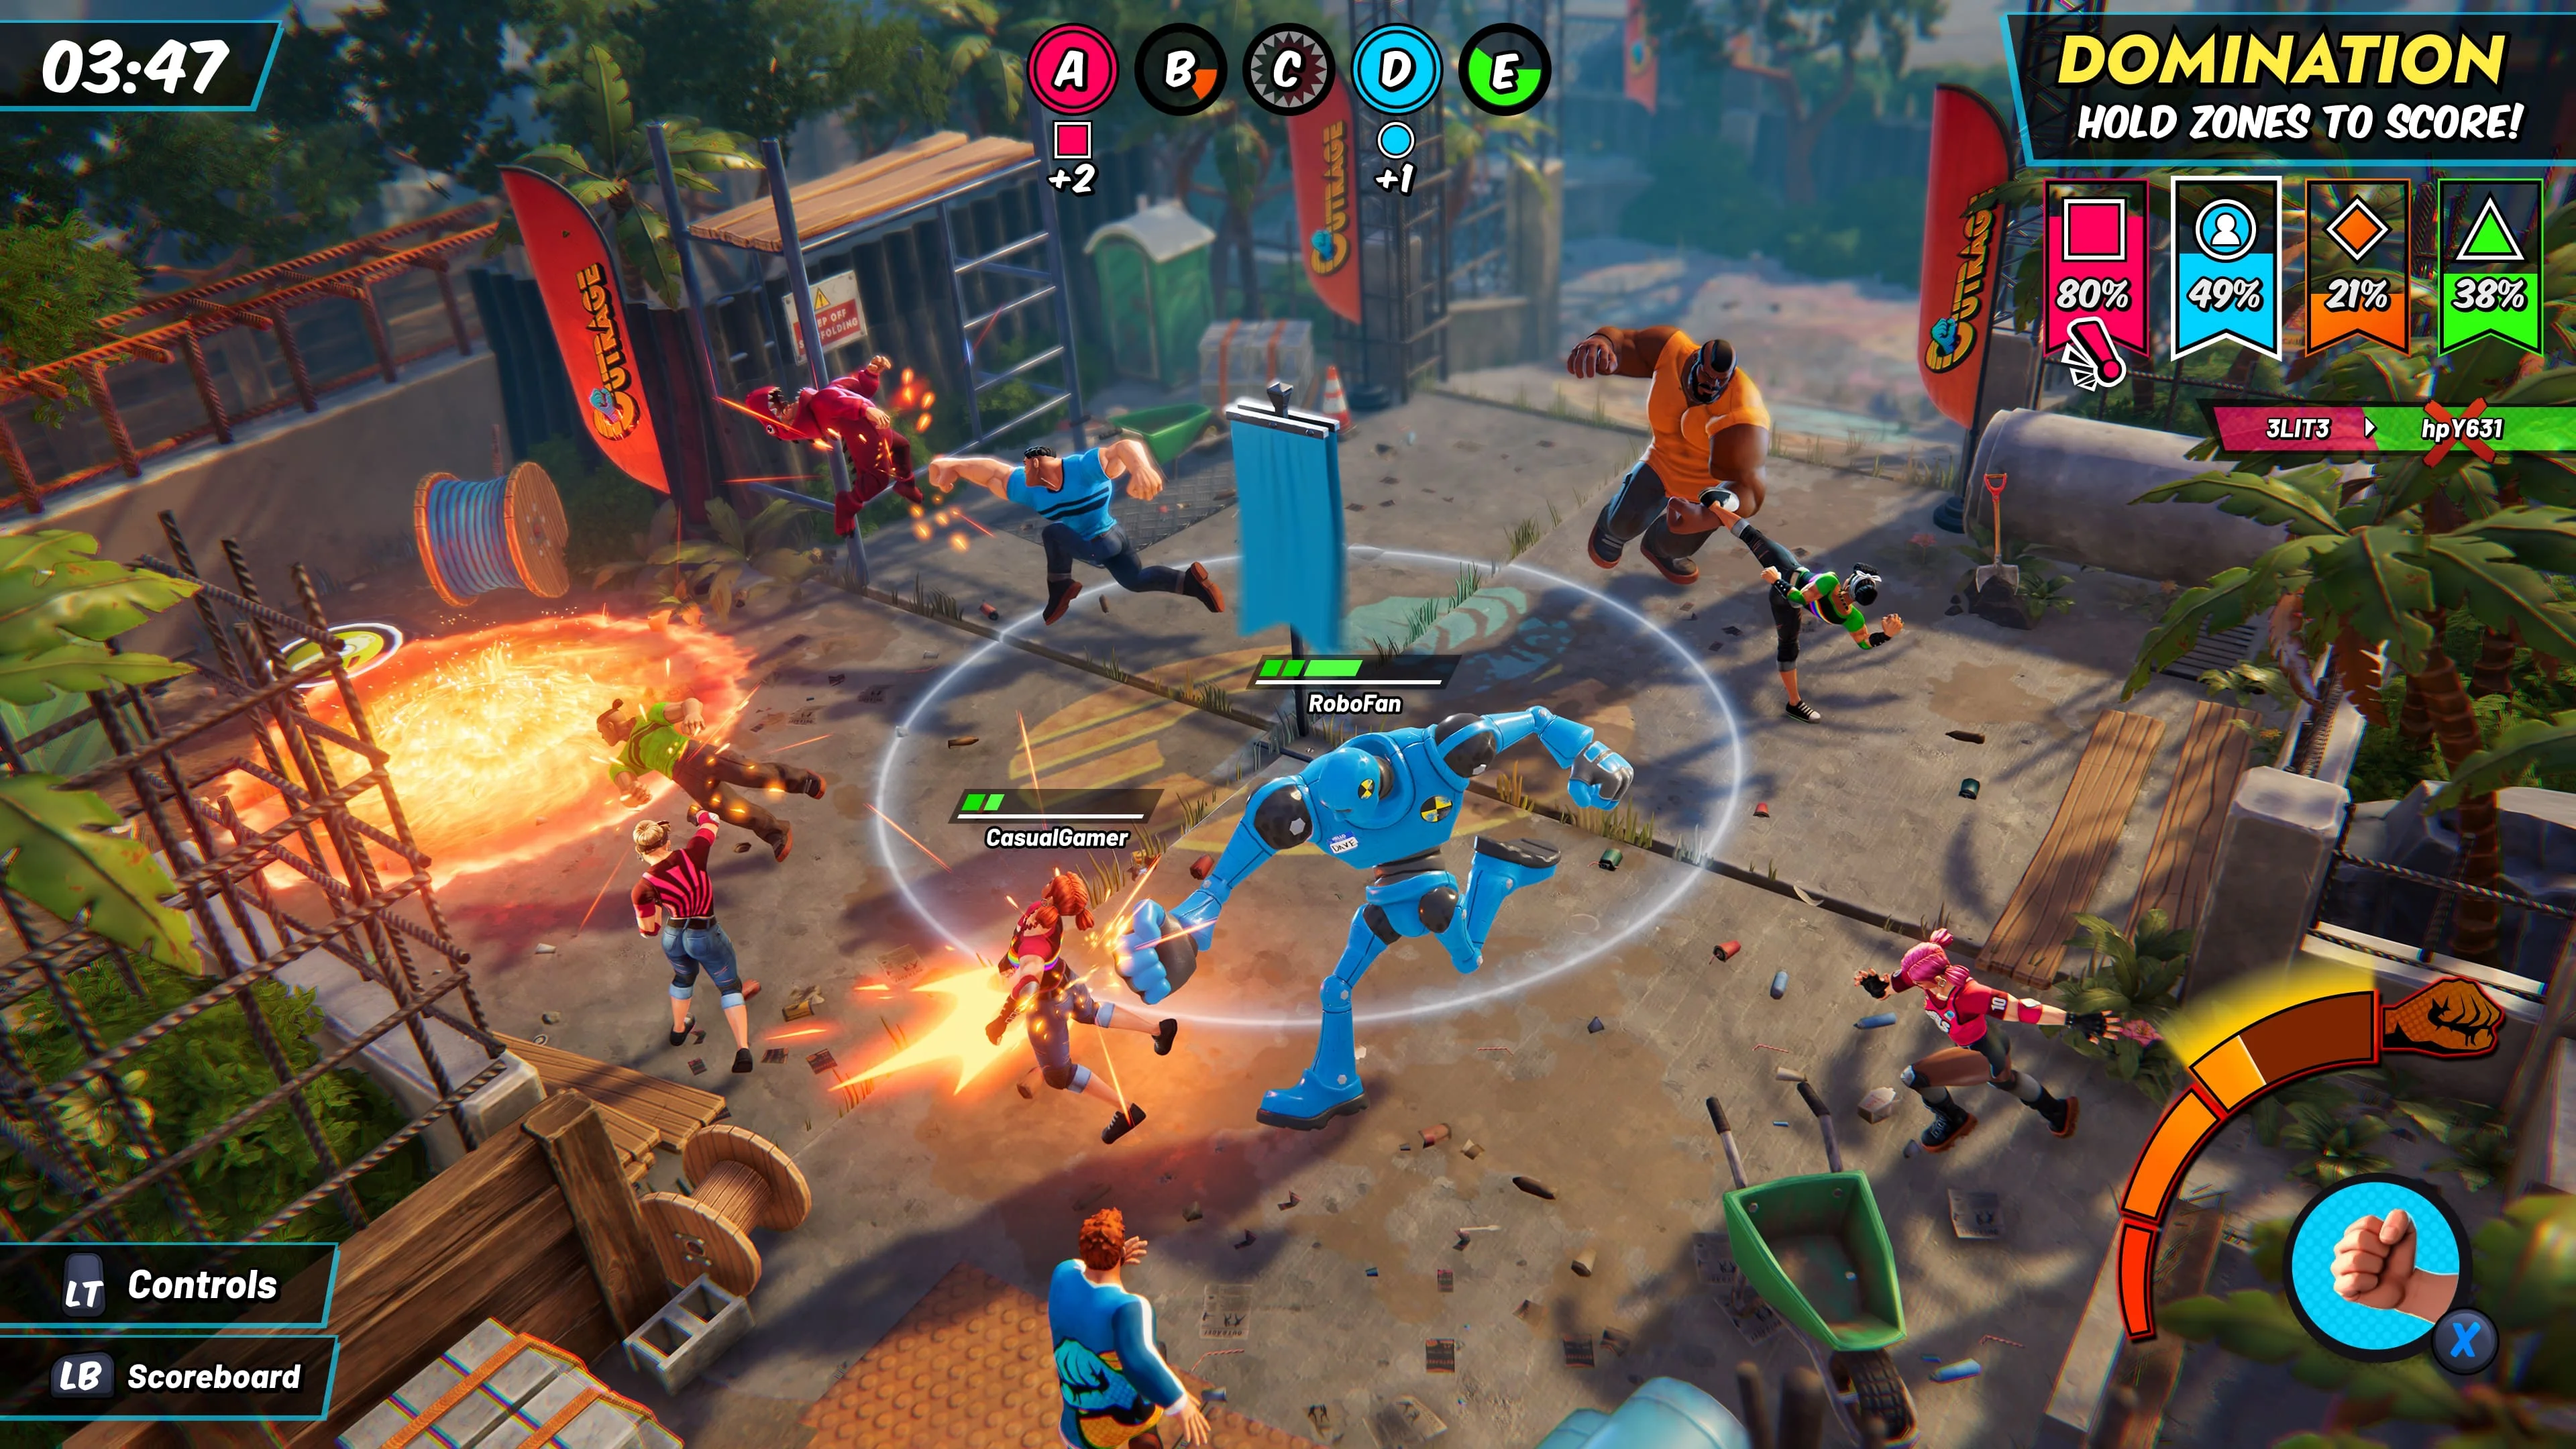 A screenshot from a game centring a large, blue robot character punching a small red-haired female character. In the background are several characters fighting.